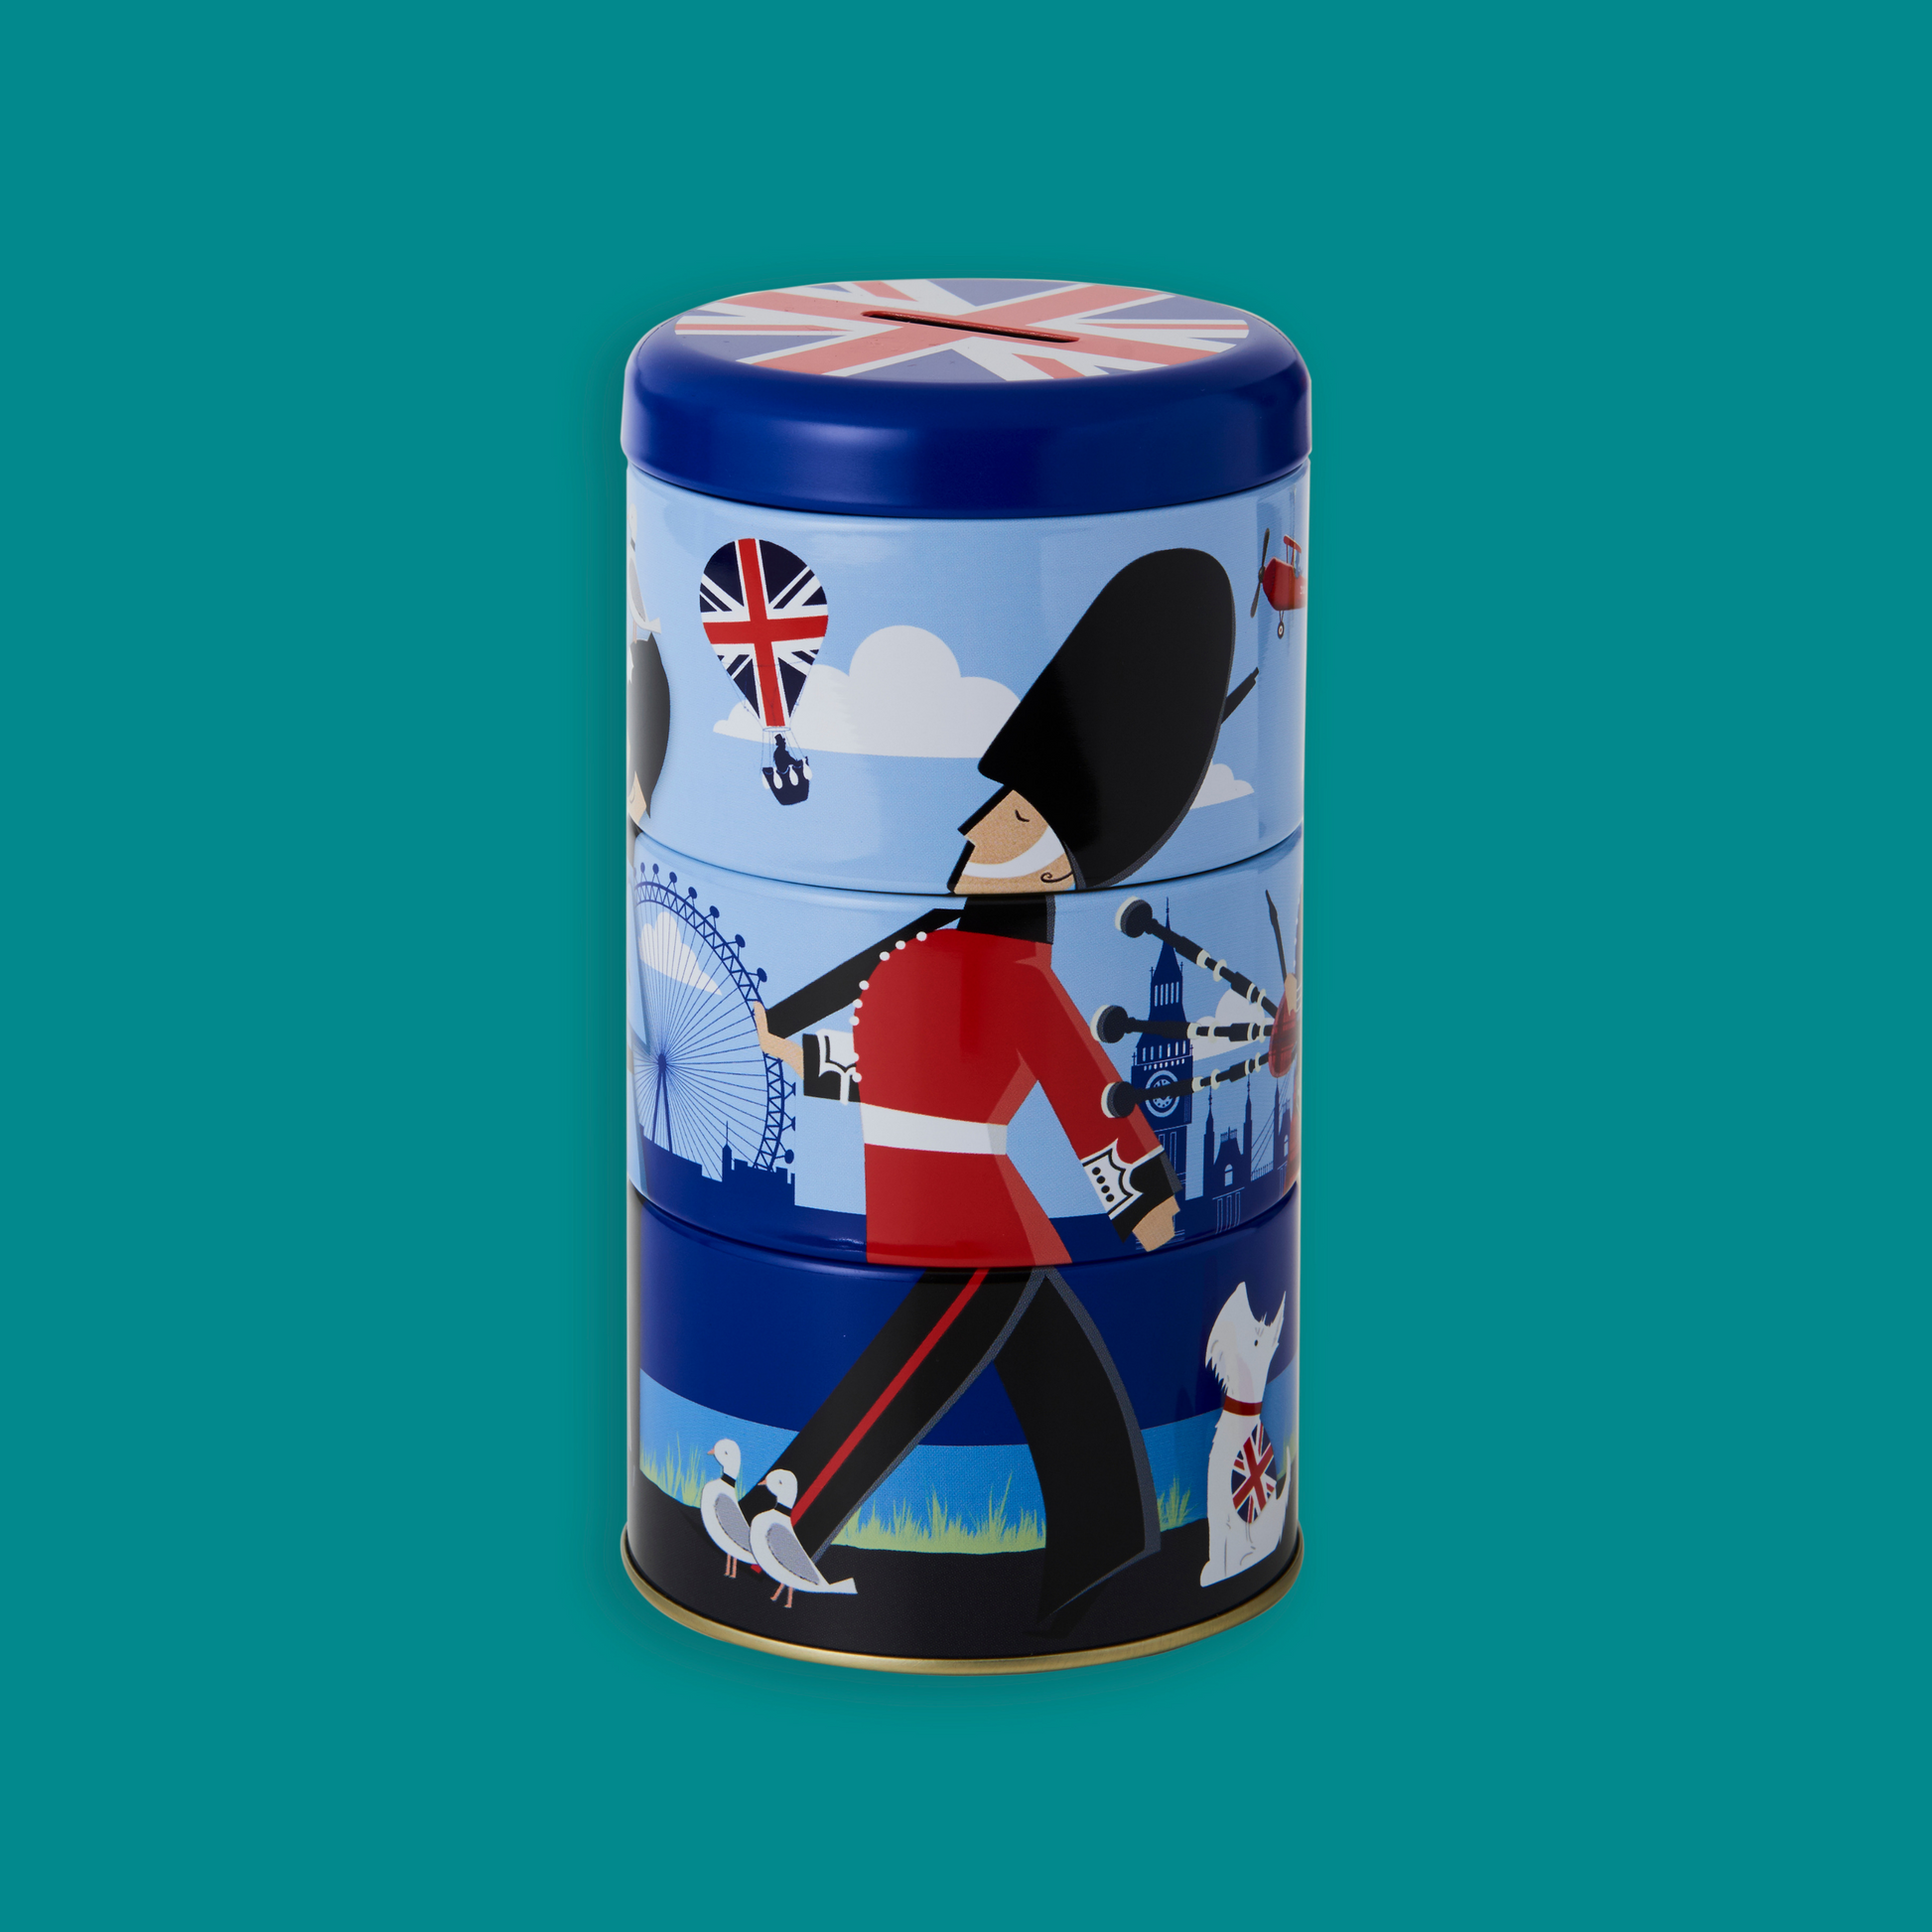 Souvenir Gifts British Character Twist Tin Jelly Beans